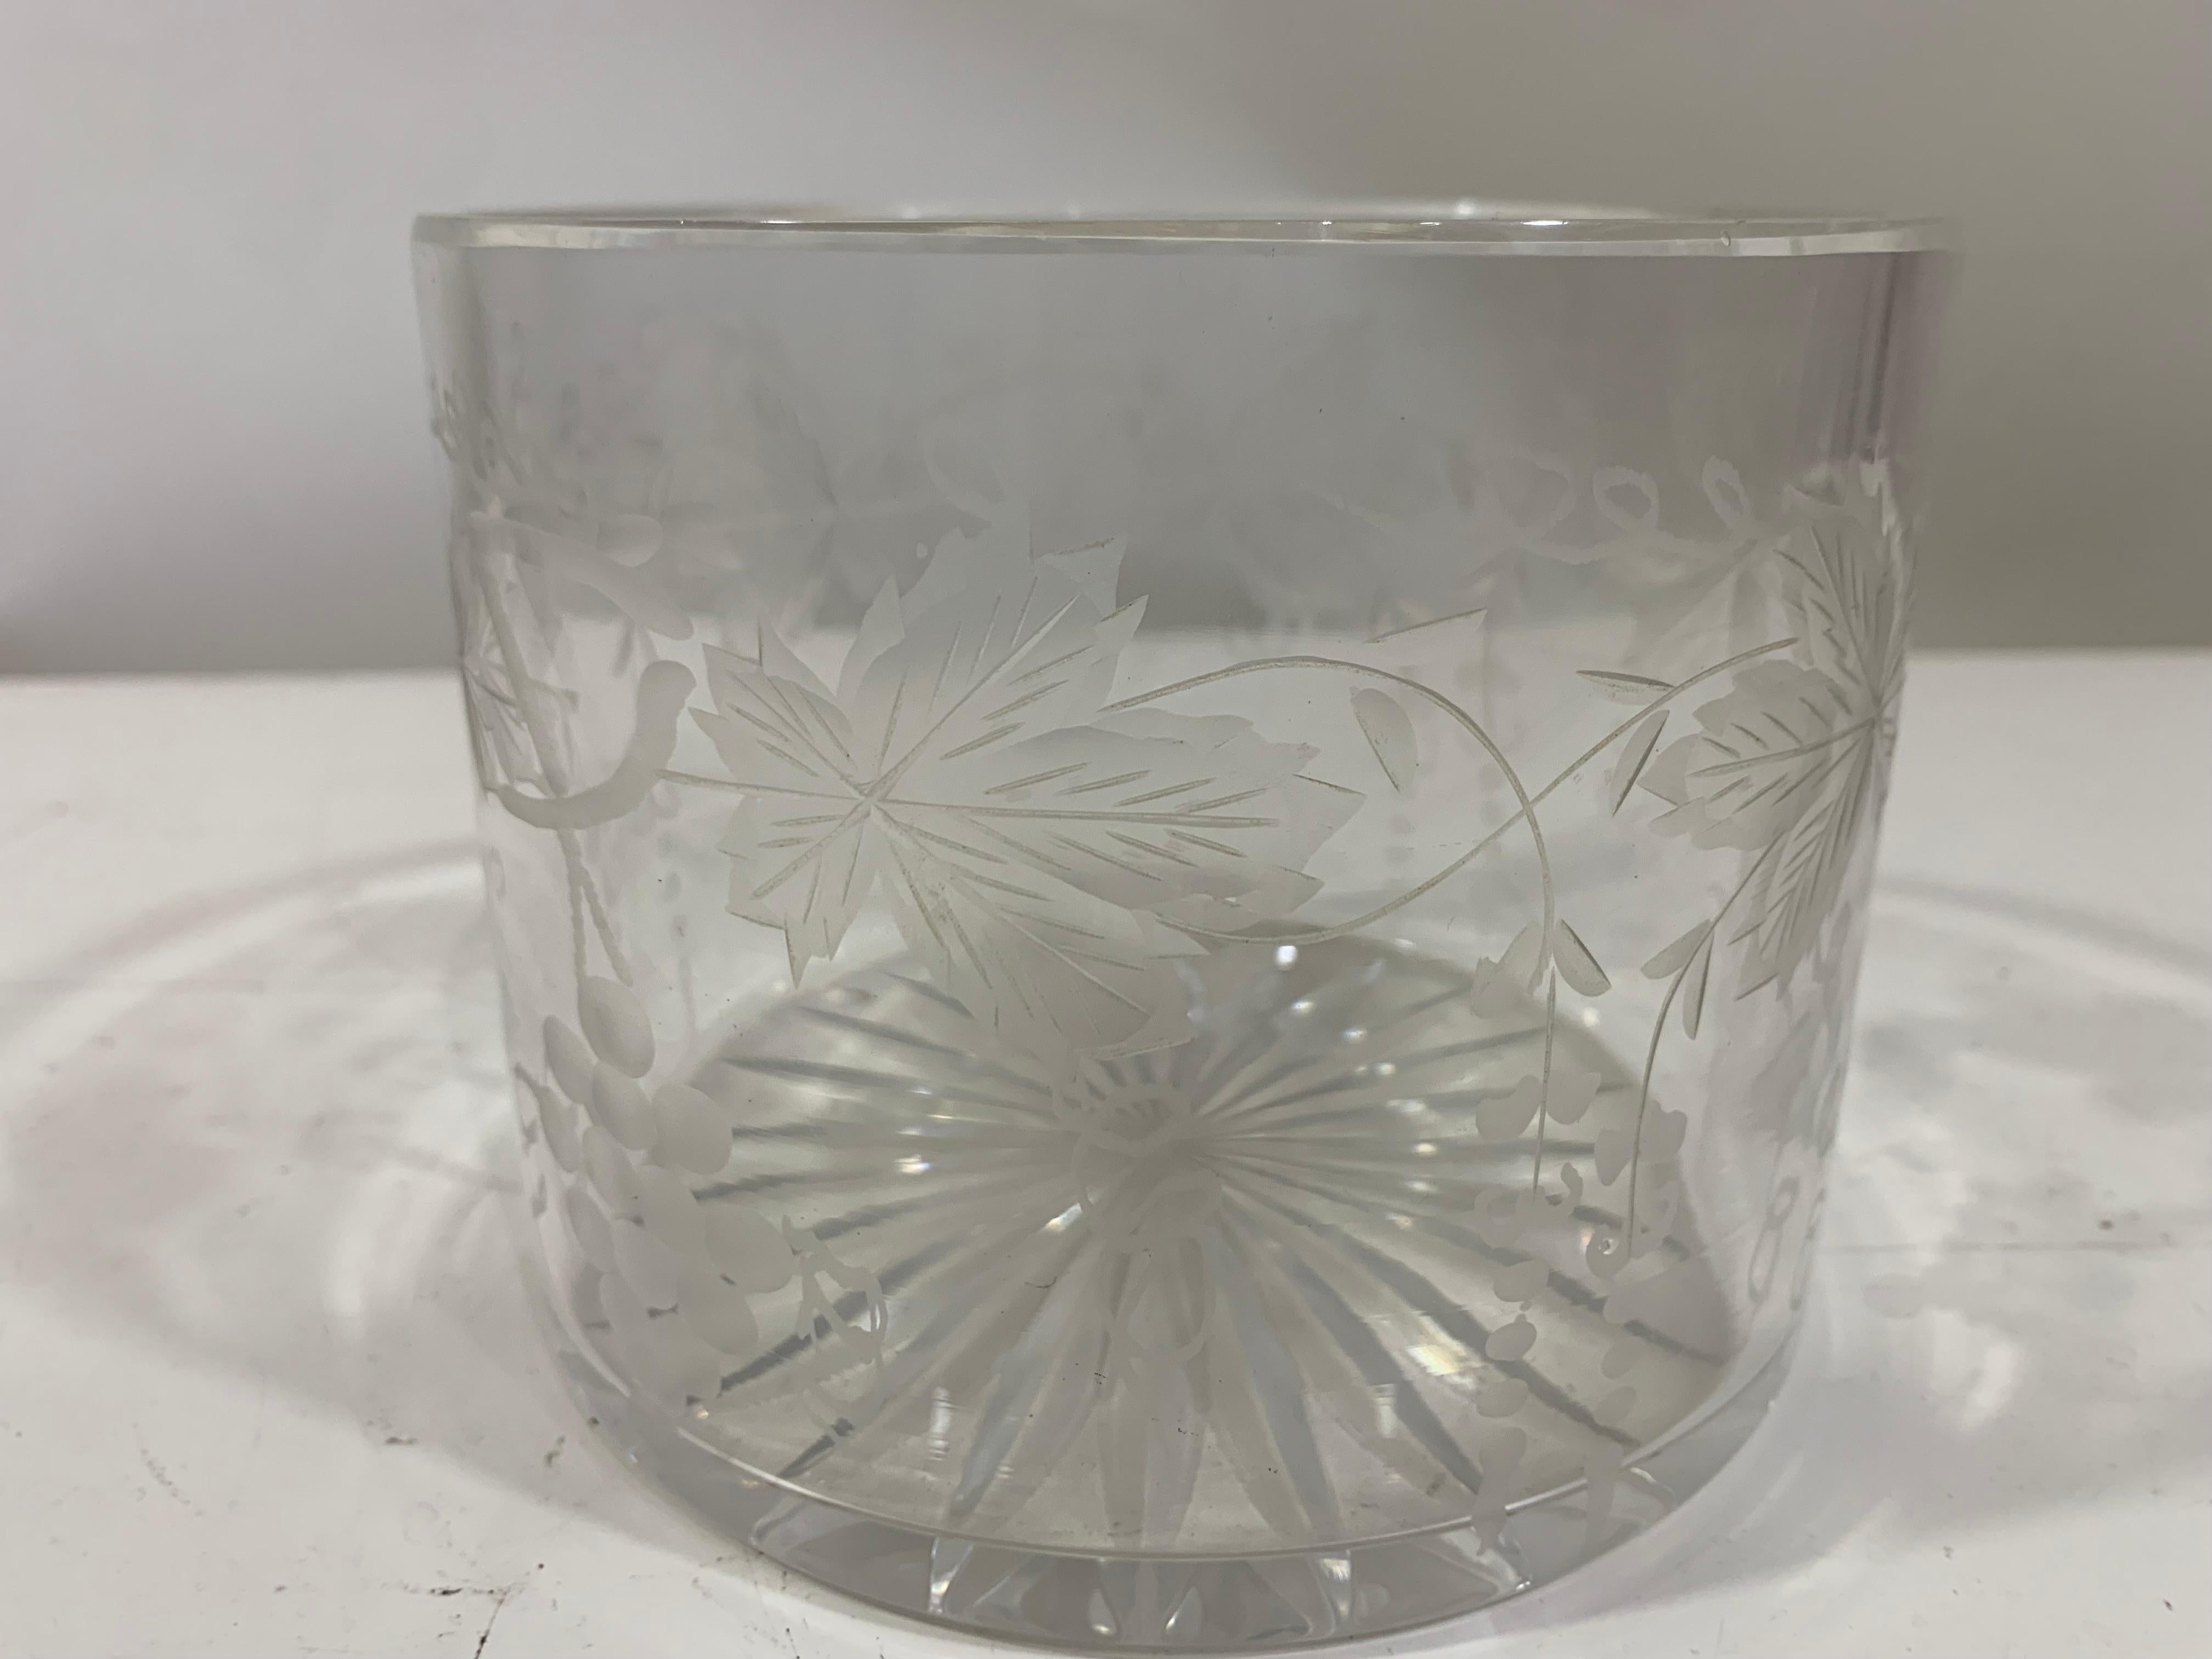 Exquisite Bartlett Collins Frosted and Etched Crystal Glass Bowl with Grape and Grape Leaves Motif.

This stunning Bartlett Collins crystal bowl is not only a visually captivating piece but also versatile in function. Use it as an elegant ice bowl